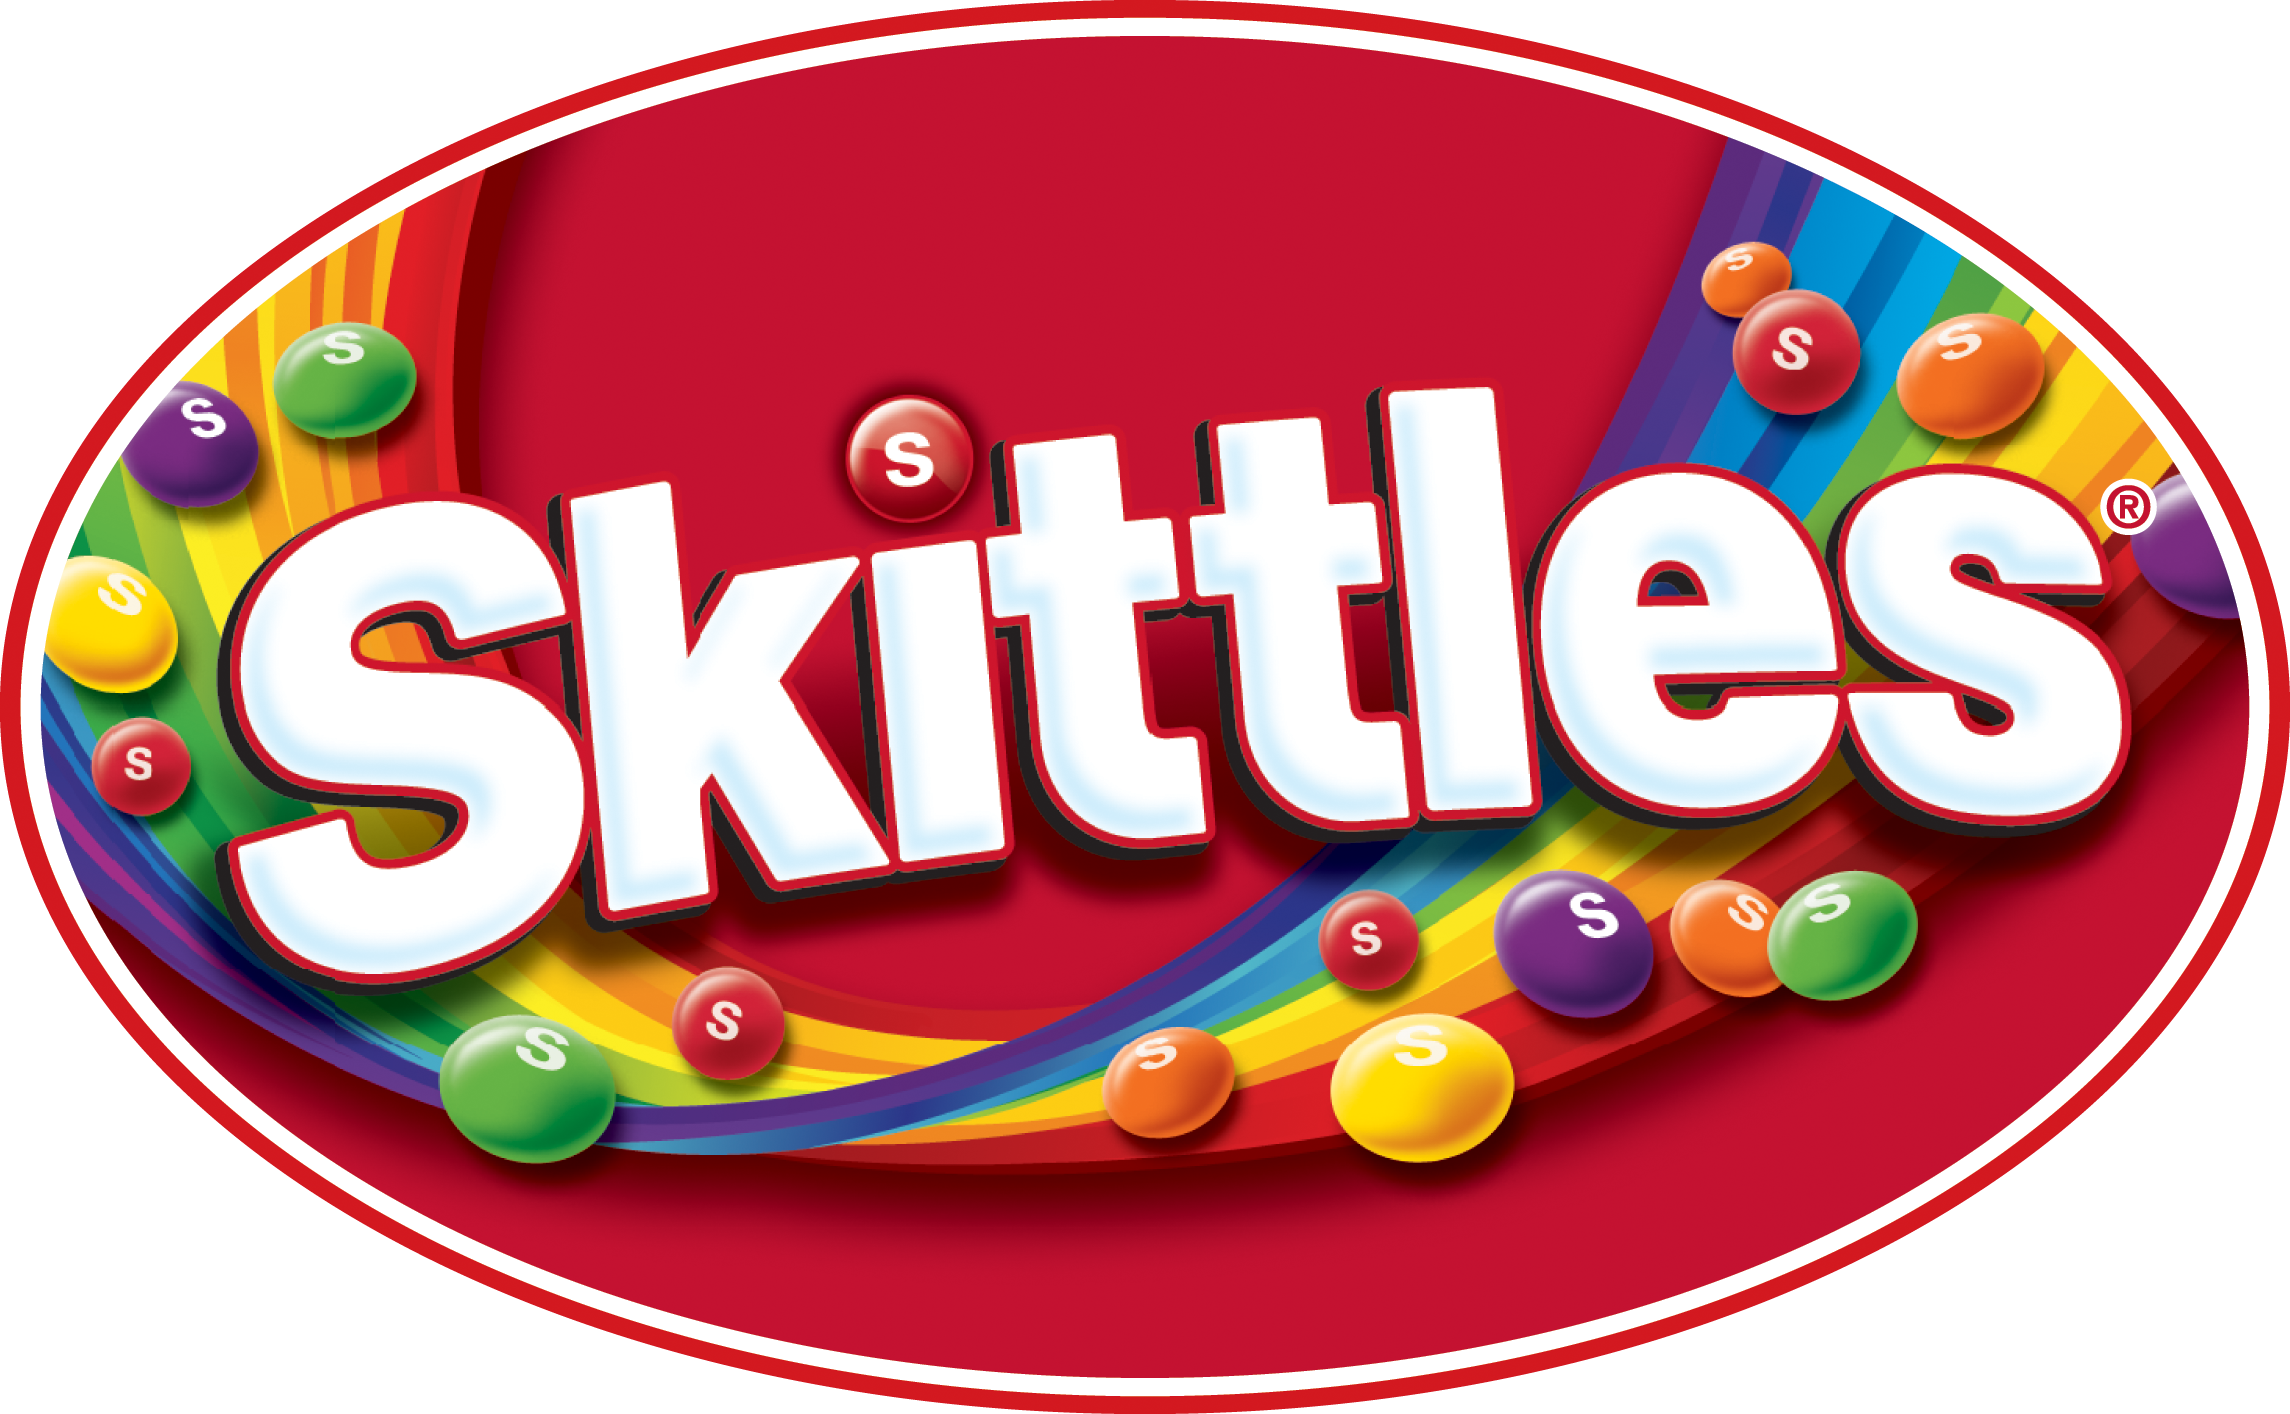 Free Skittles Cliparts Download Free Skittles Cliparts png images